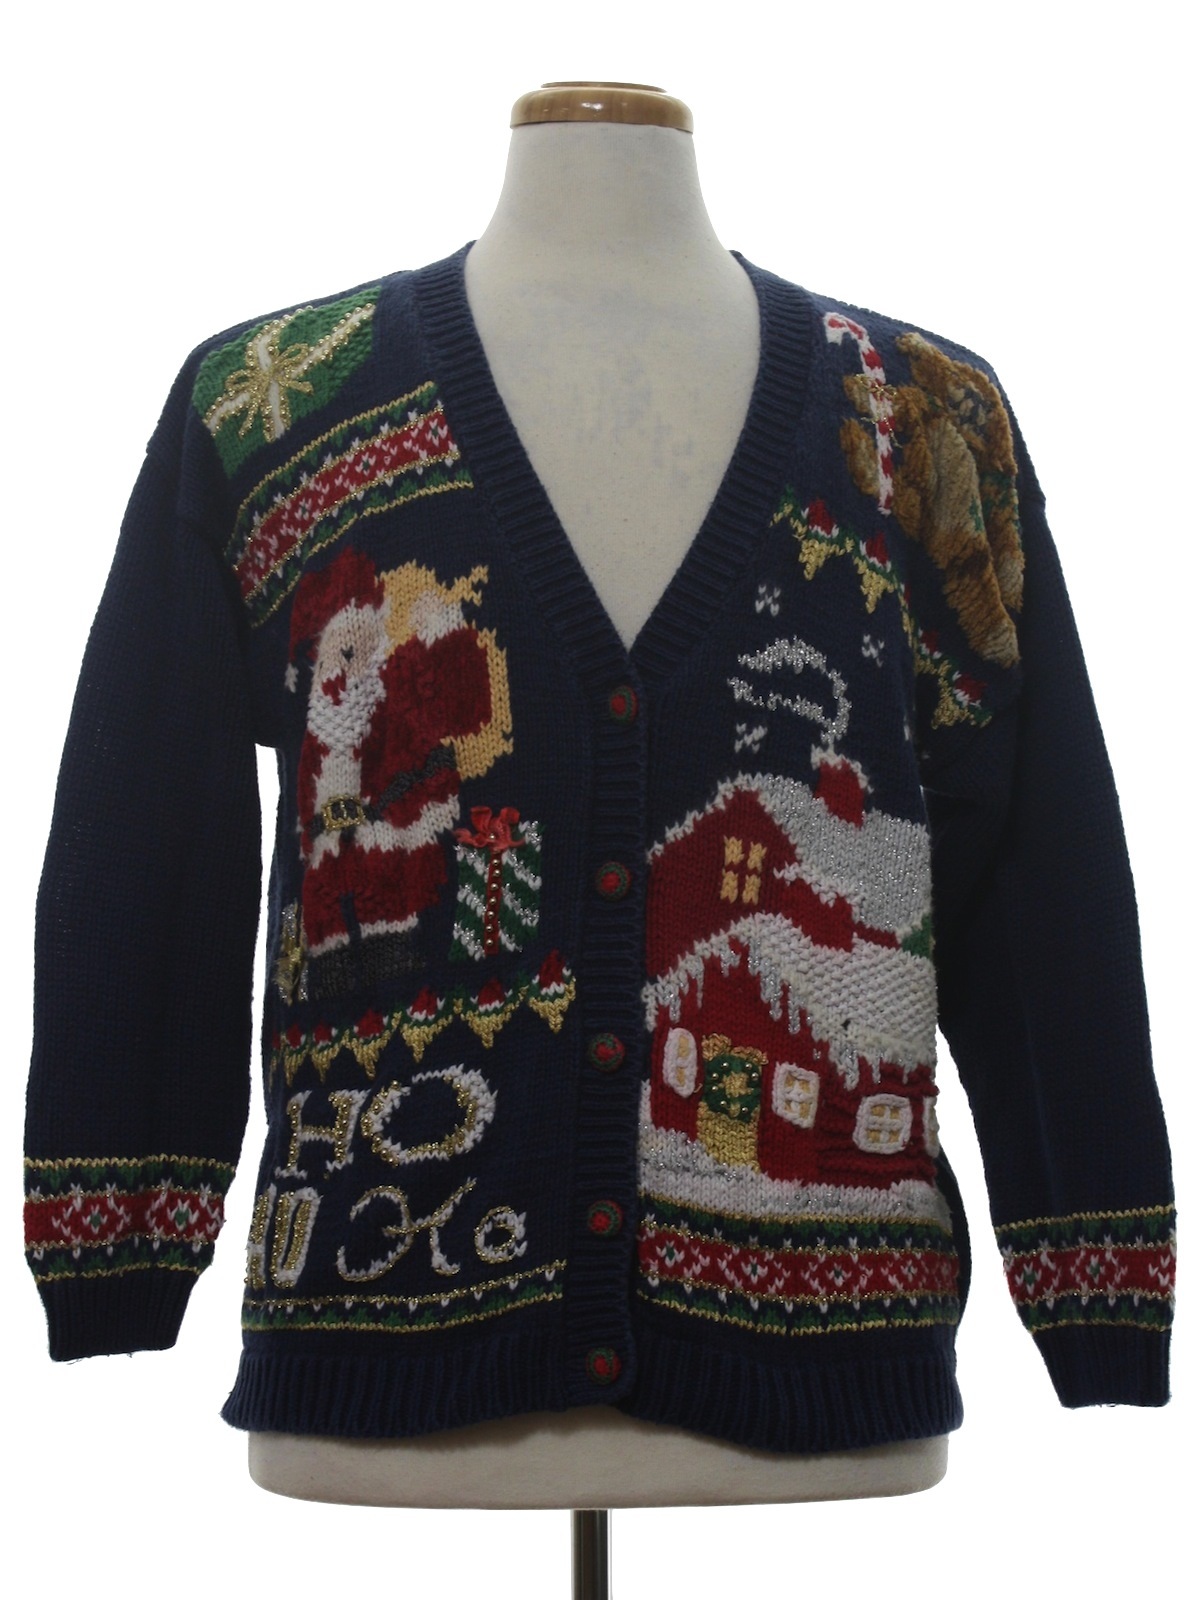 Ugly Christmas Cardigan Sweater: -Maggie Lawrence- Unisex dark blue ...